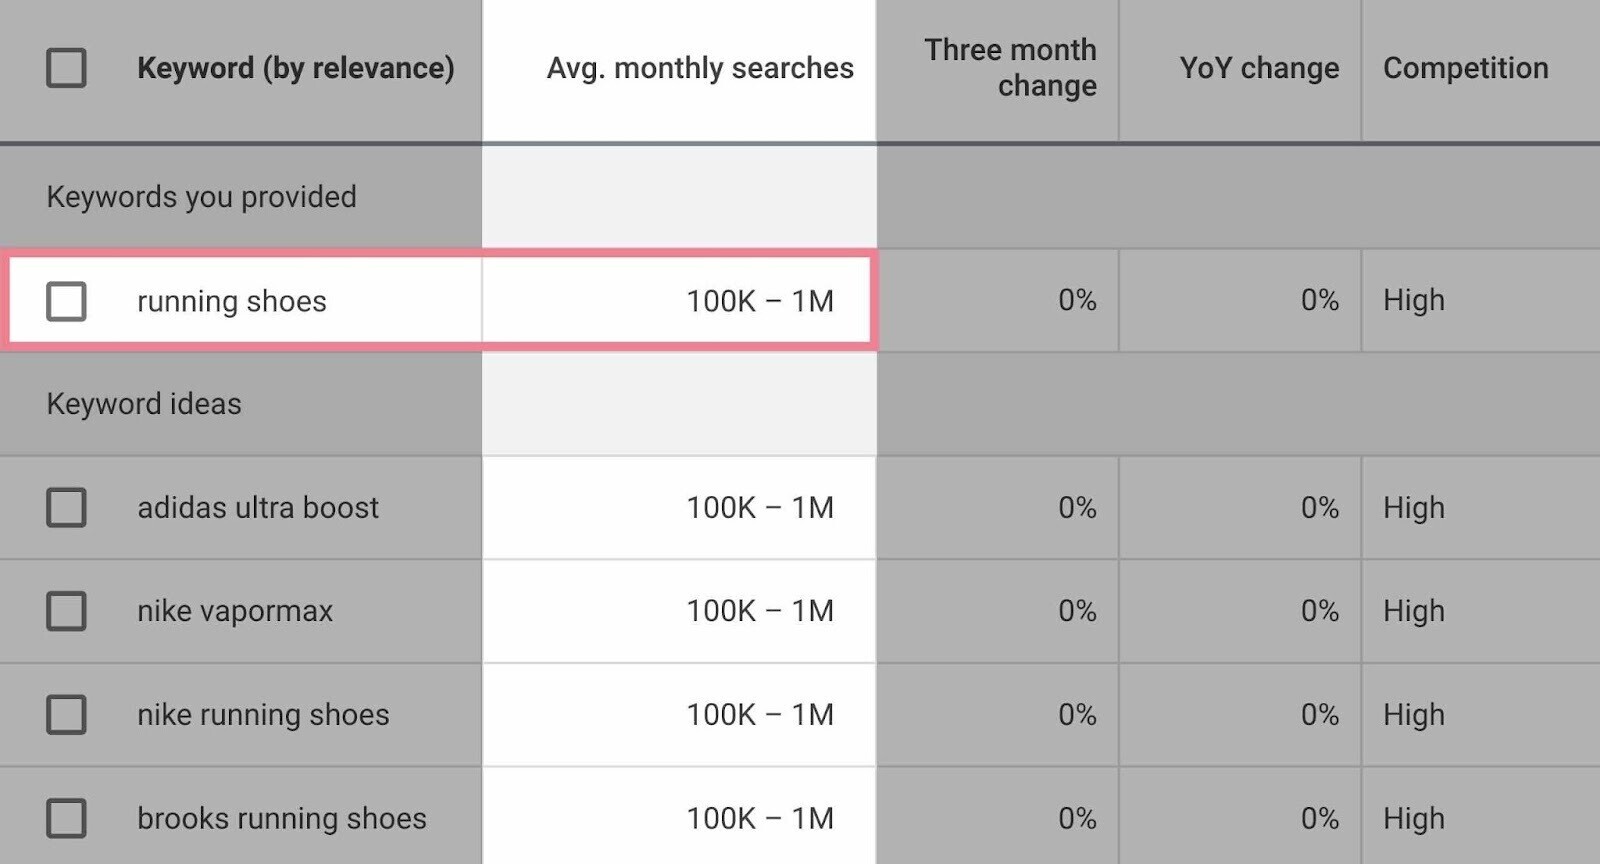 Avg. monthly searches column highlighted